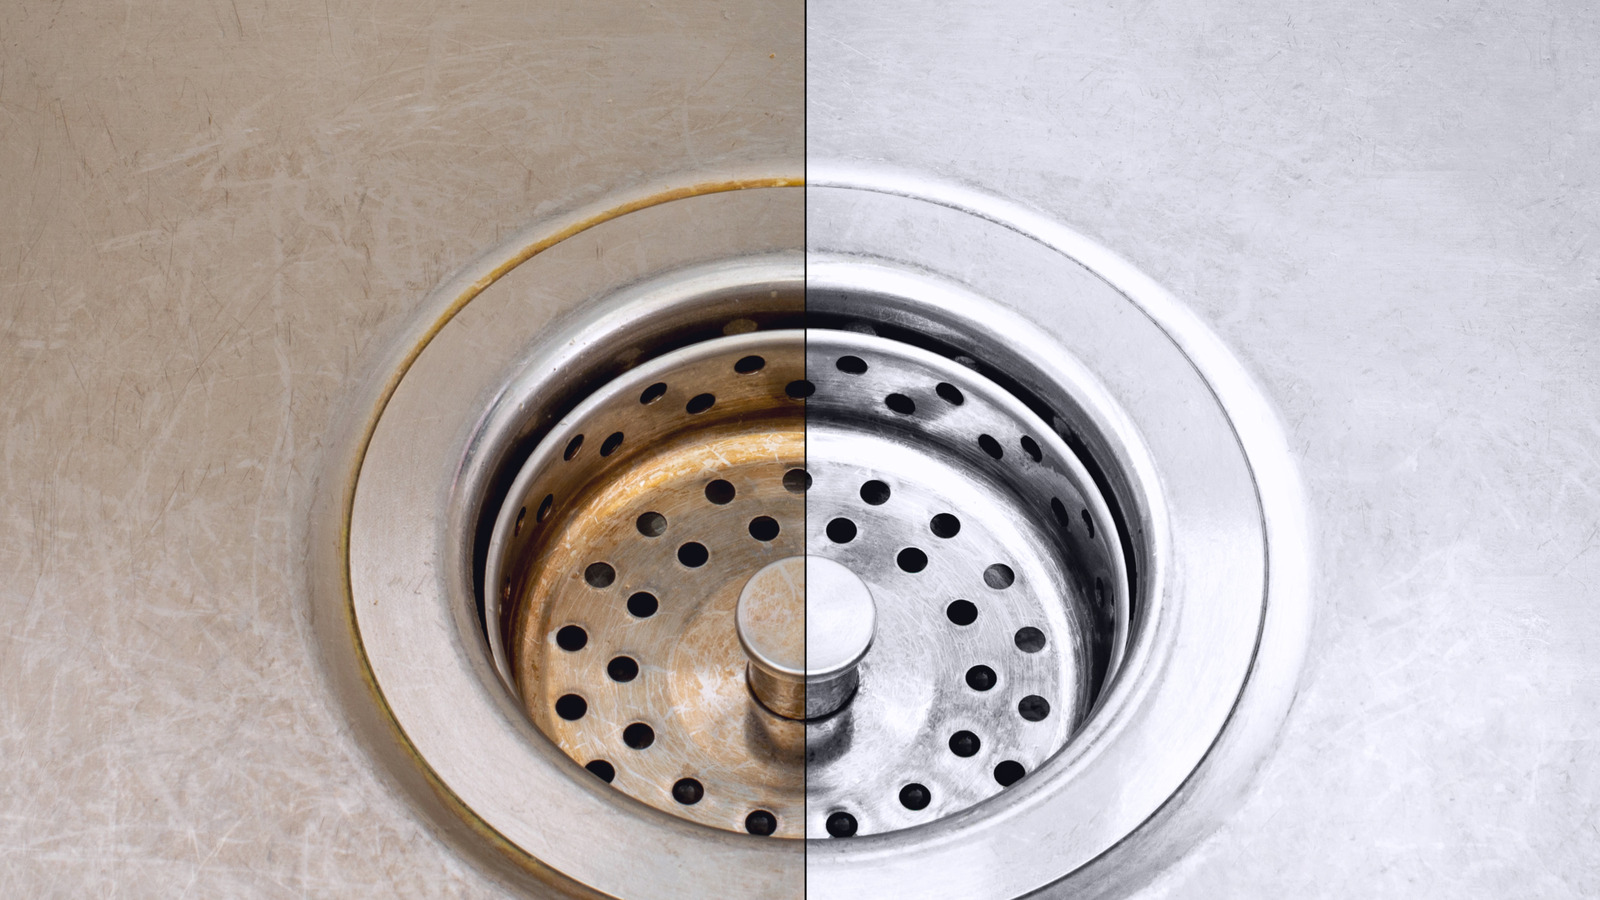 How to Unclog a Sink Drain: 5 Methods That Work - Bob Vila